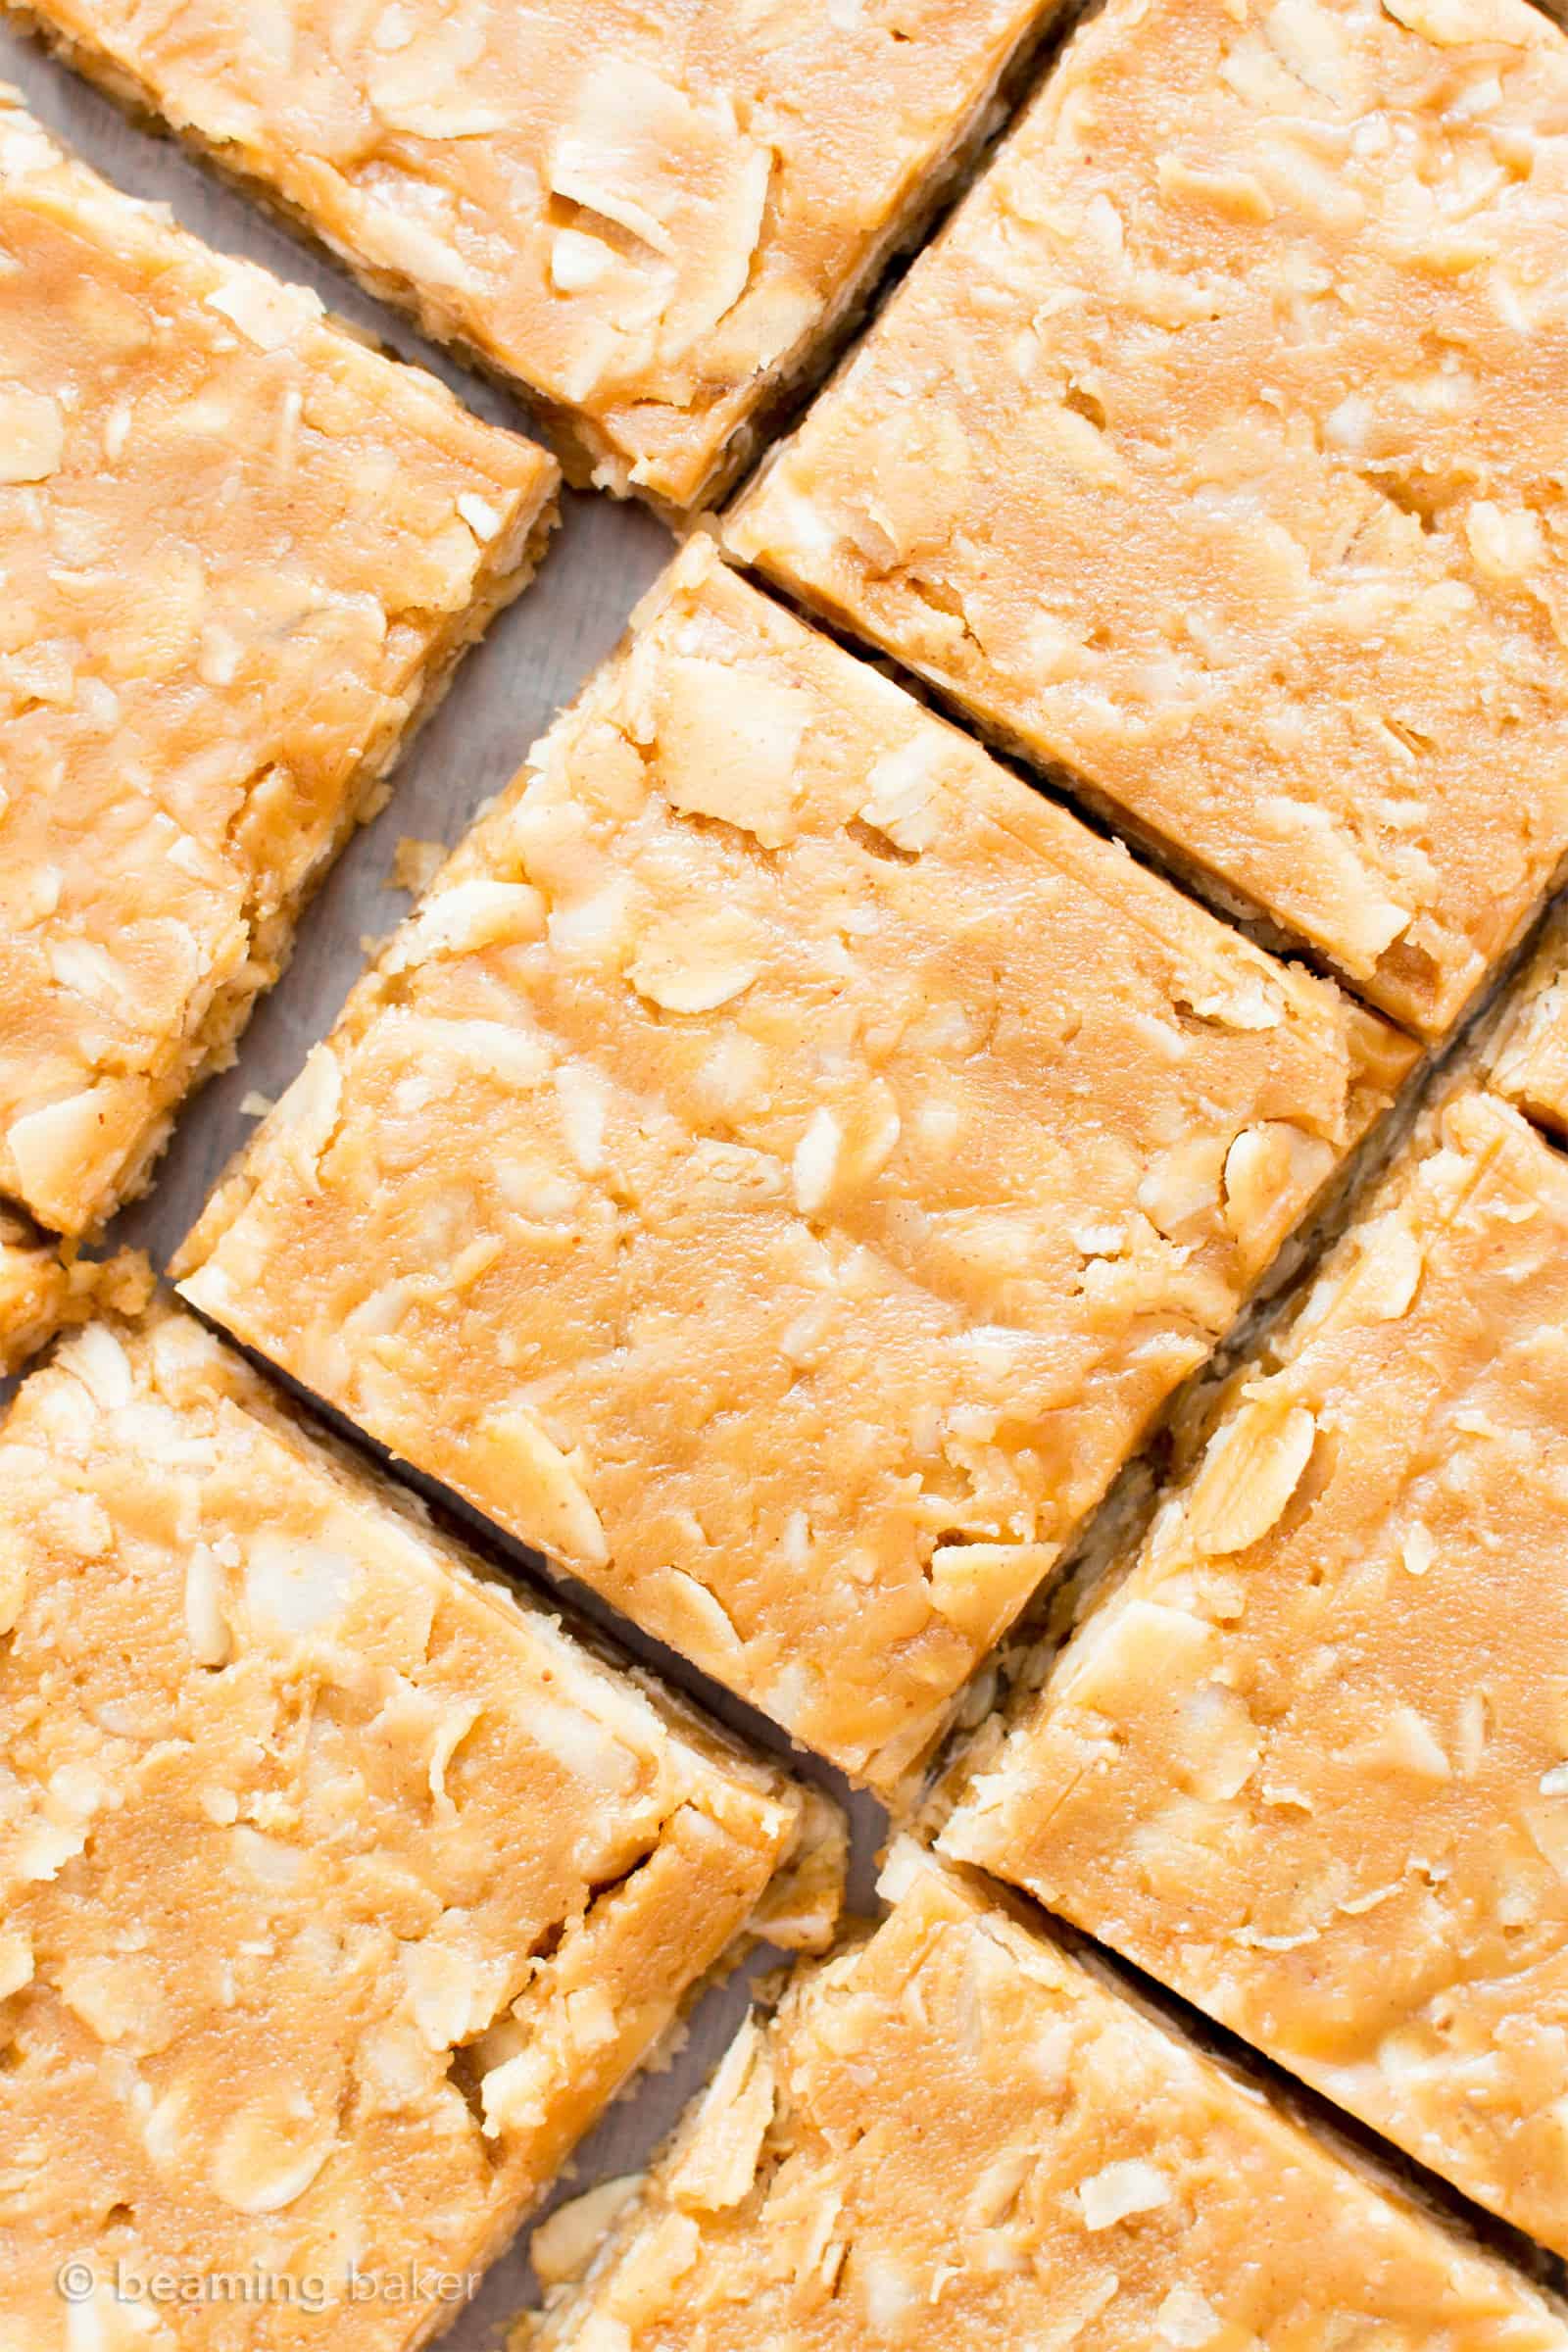 4 Ingredient No Bake Peanut Butter Coconut Oatmeal Bars (V, GF): an easy, one bowl recipe for protein-rich, gluten-free oatmeal bars bursting with peanut butter and coconut. #Vegan #GlutenFree #DairyFree #HealthySnacks #ProteinRich #RefinedSugarFree #PlantBased | Recipe on BeamingBaker.com